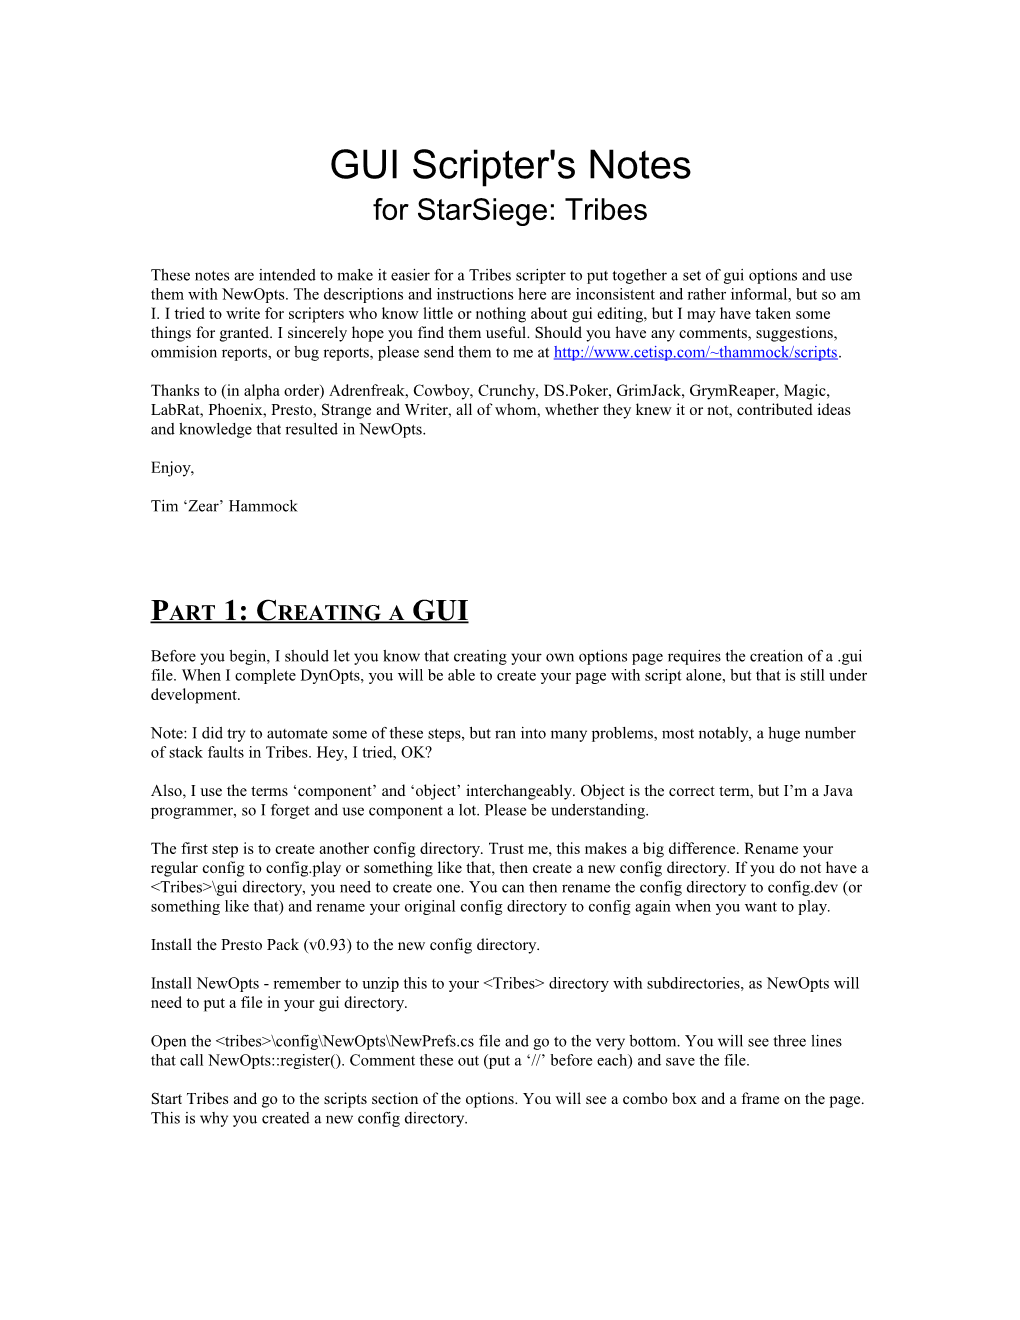 Newopts Scripter's Notes